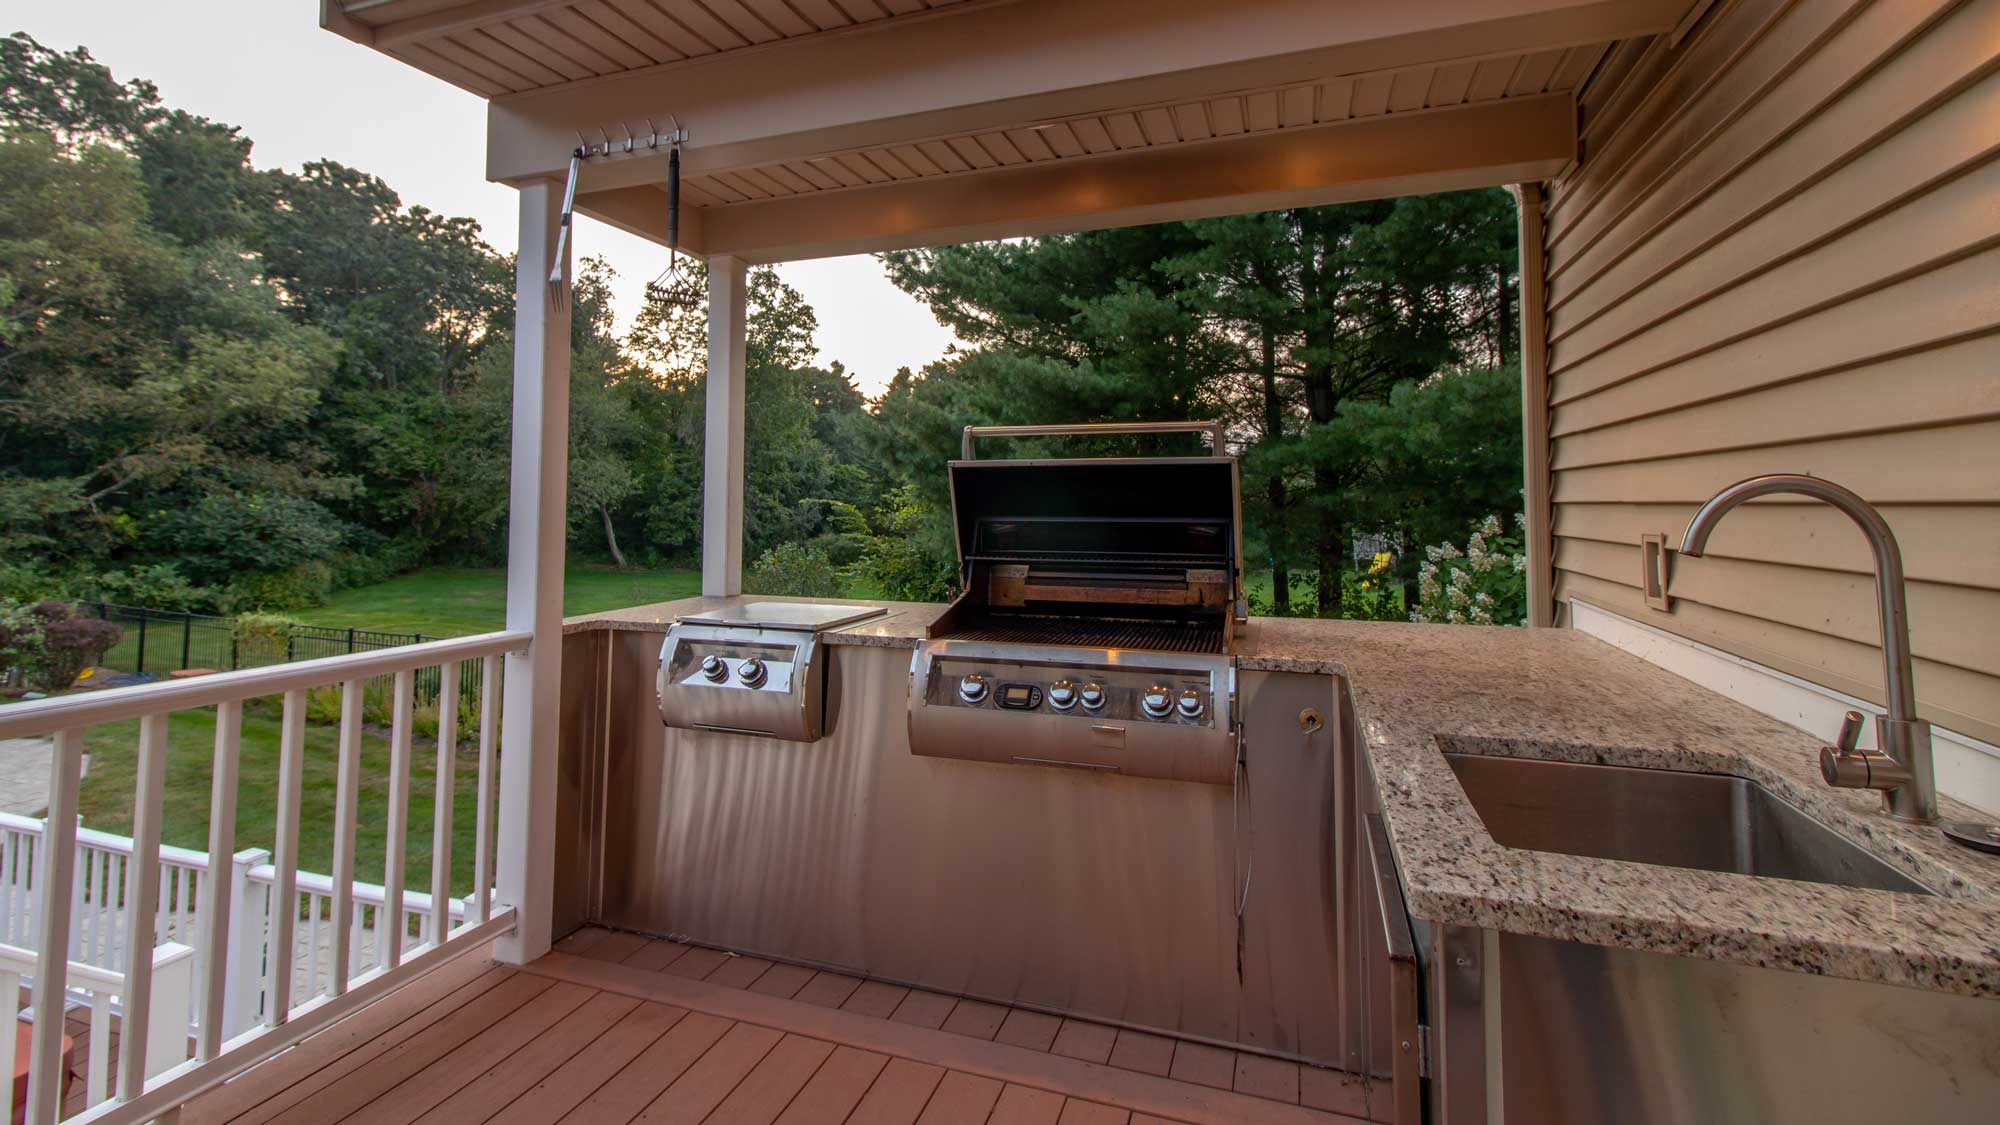 An outdoor kitchen with a sink, grill, and cooktop